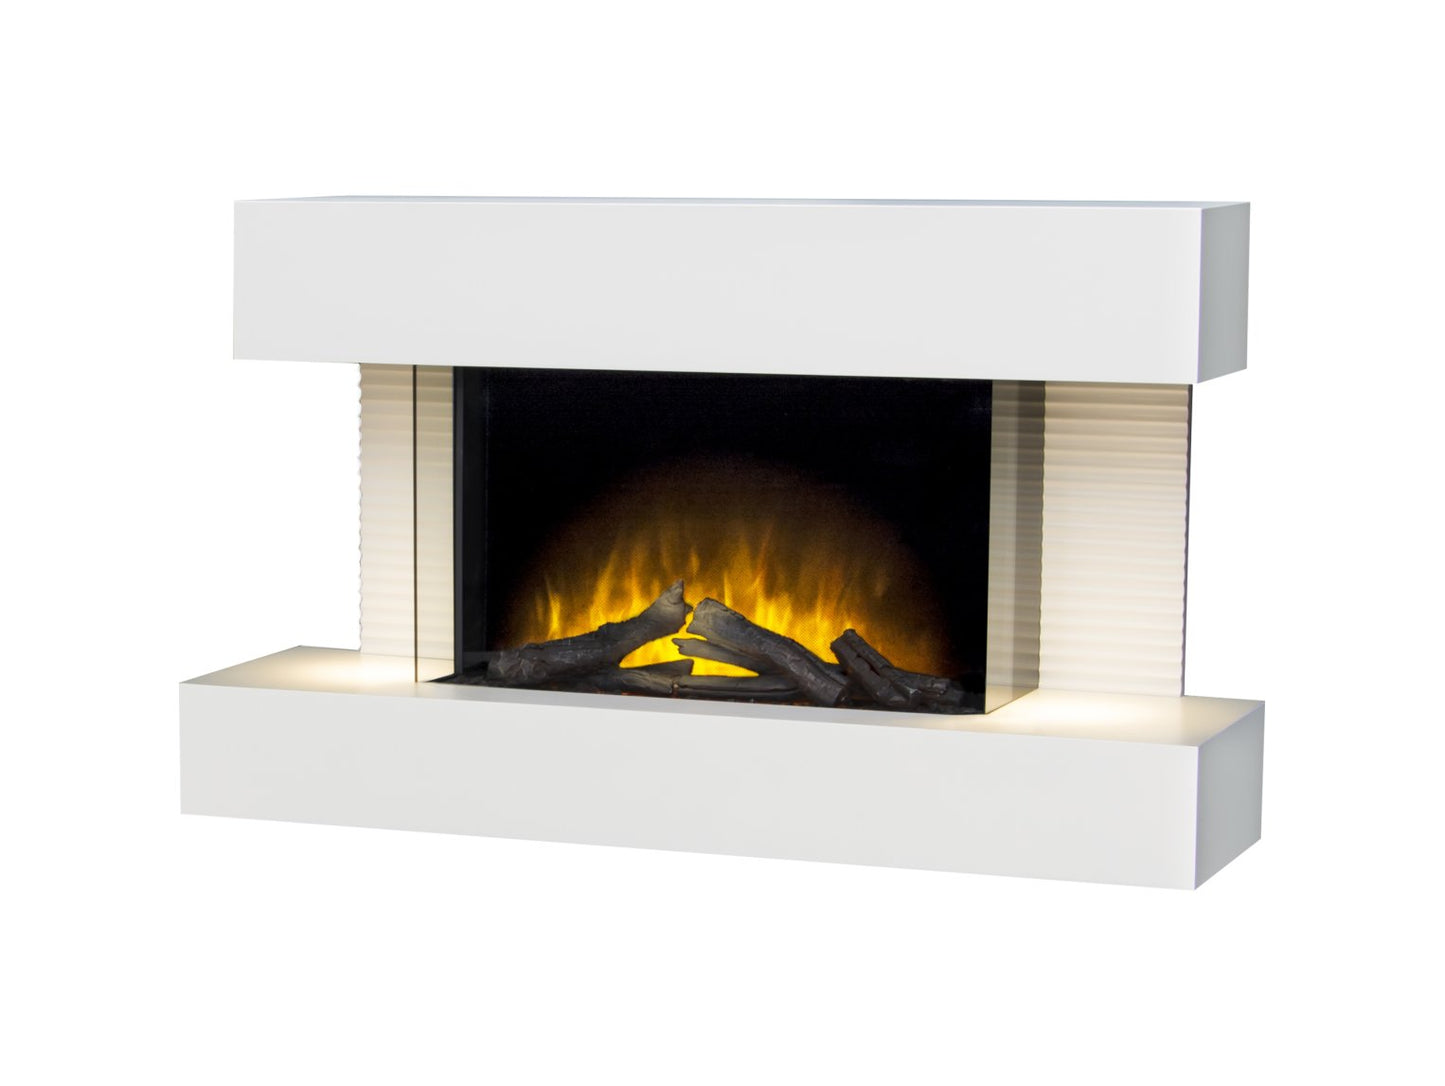 Adam Altair Wall Mounted Electric Fire Suite + Downlights & Remote Control Pure White